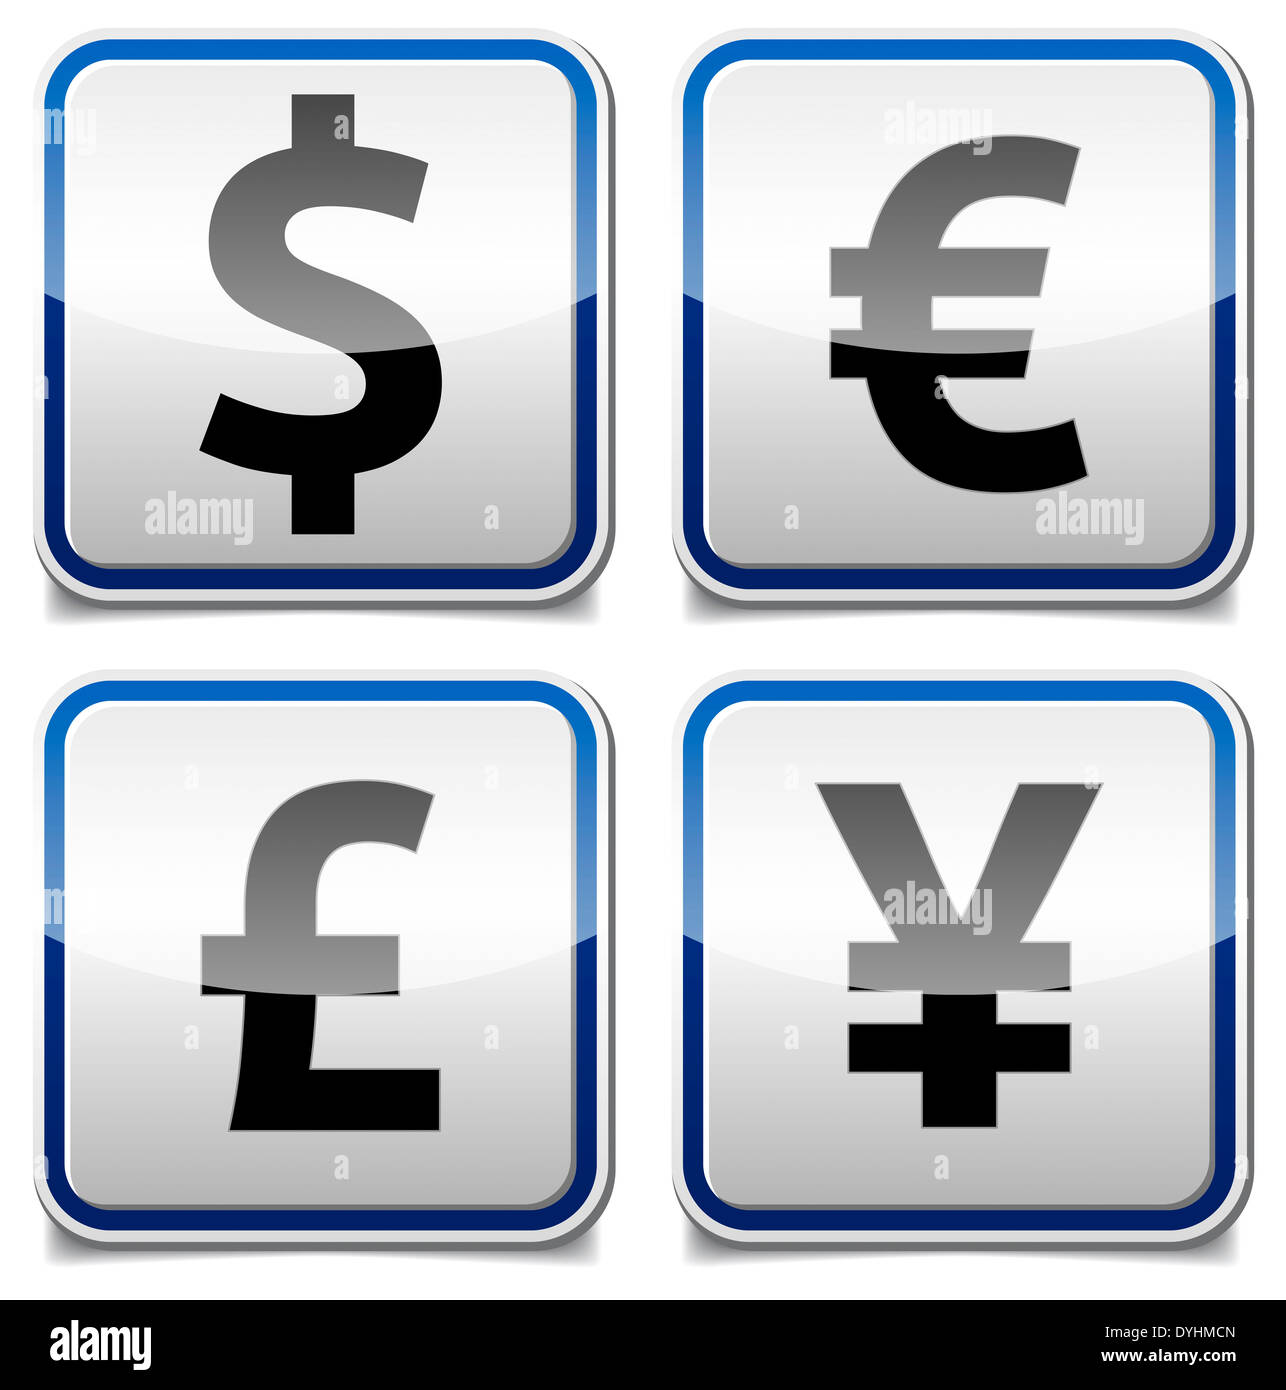 Currency money sign. White background, shadow. Stock Photo